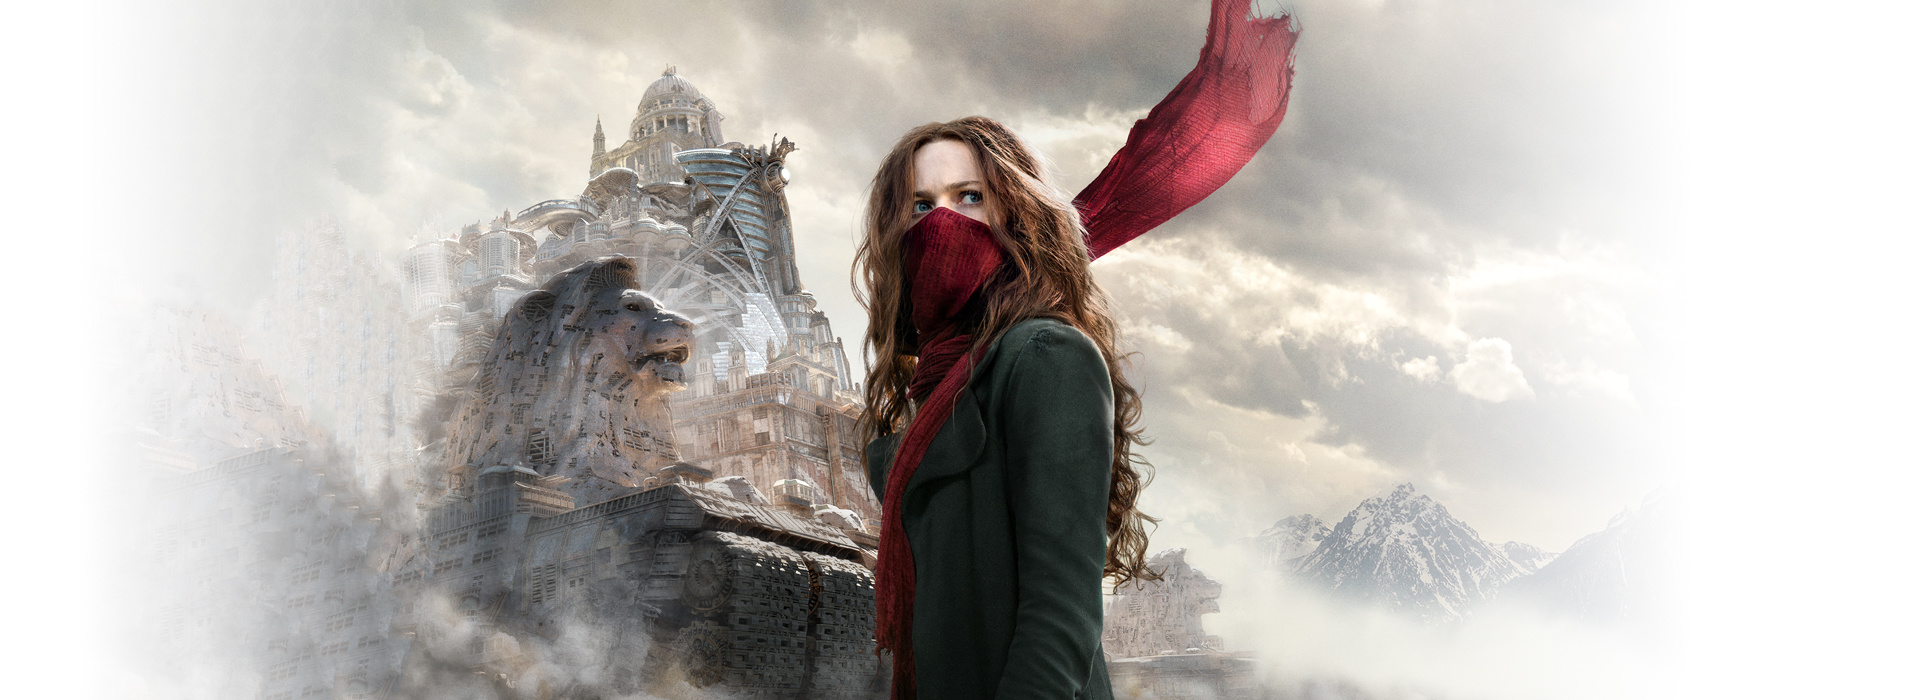 Movie poster Mortal Engines